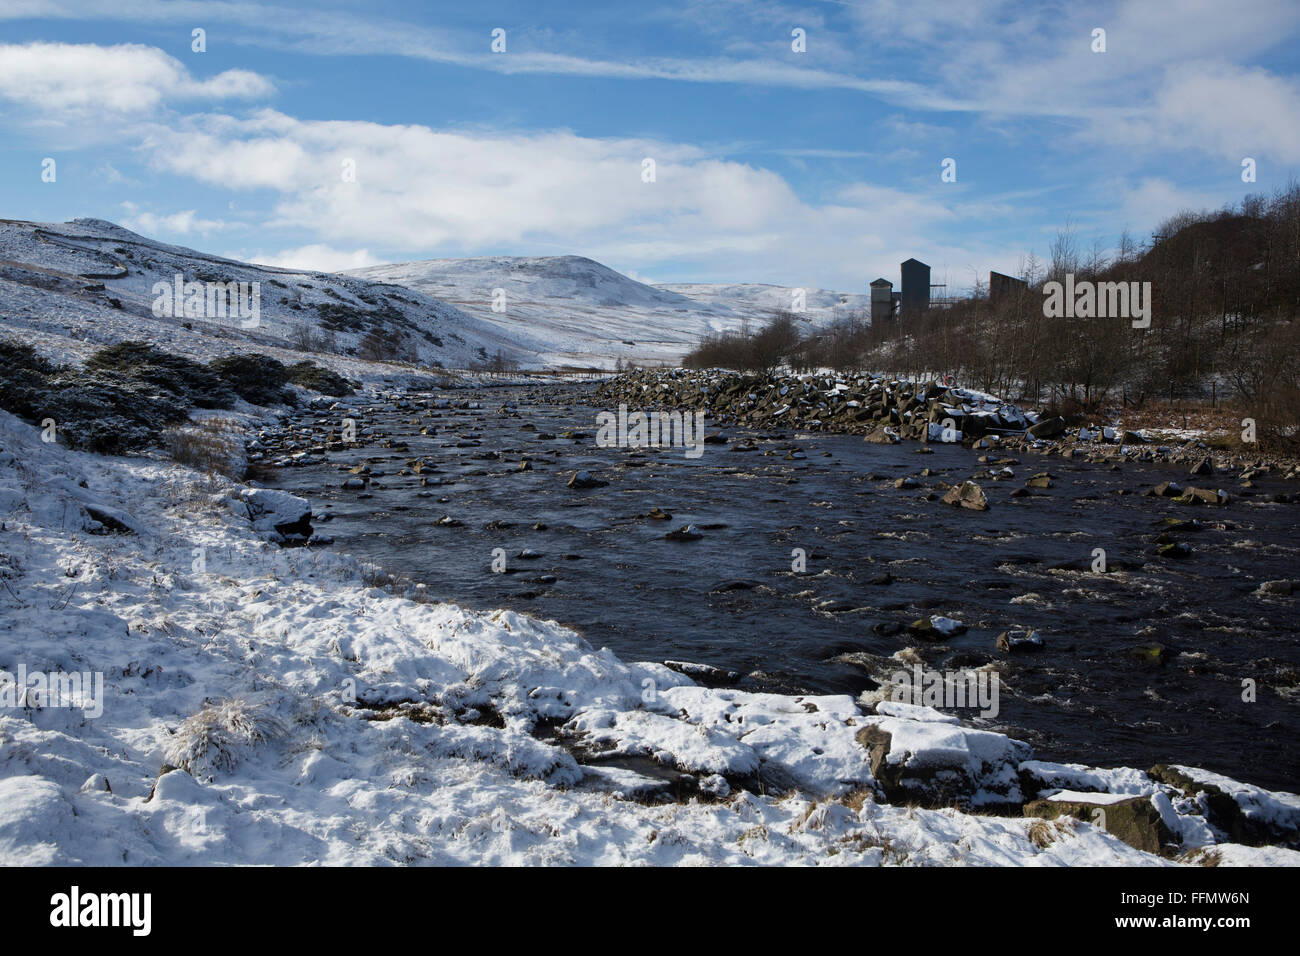 The River Tees runs through Upper Teesdale in County Durham, England. The river flows by the Pennine Way. Stock Photo